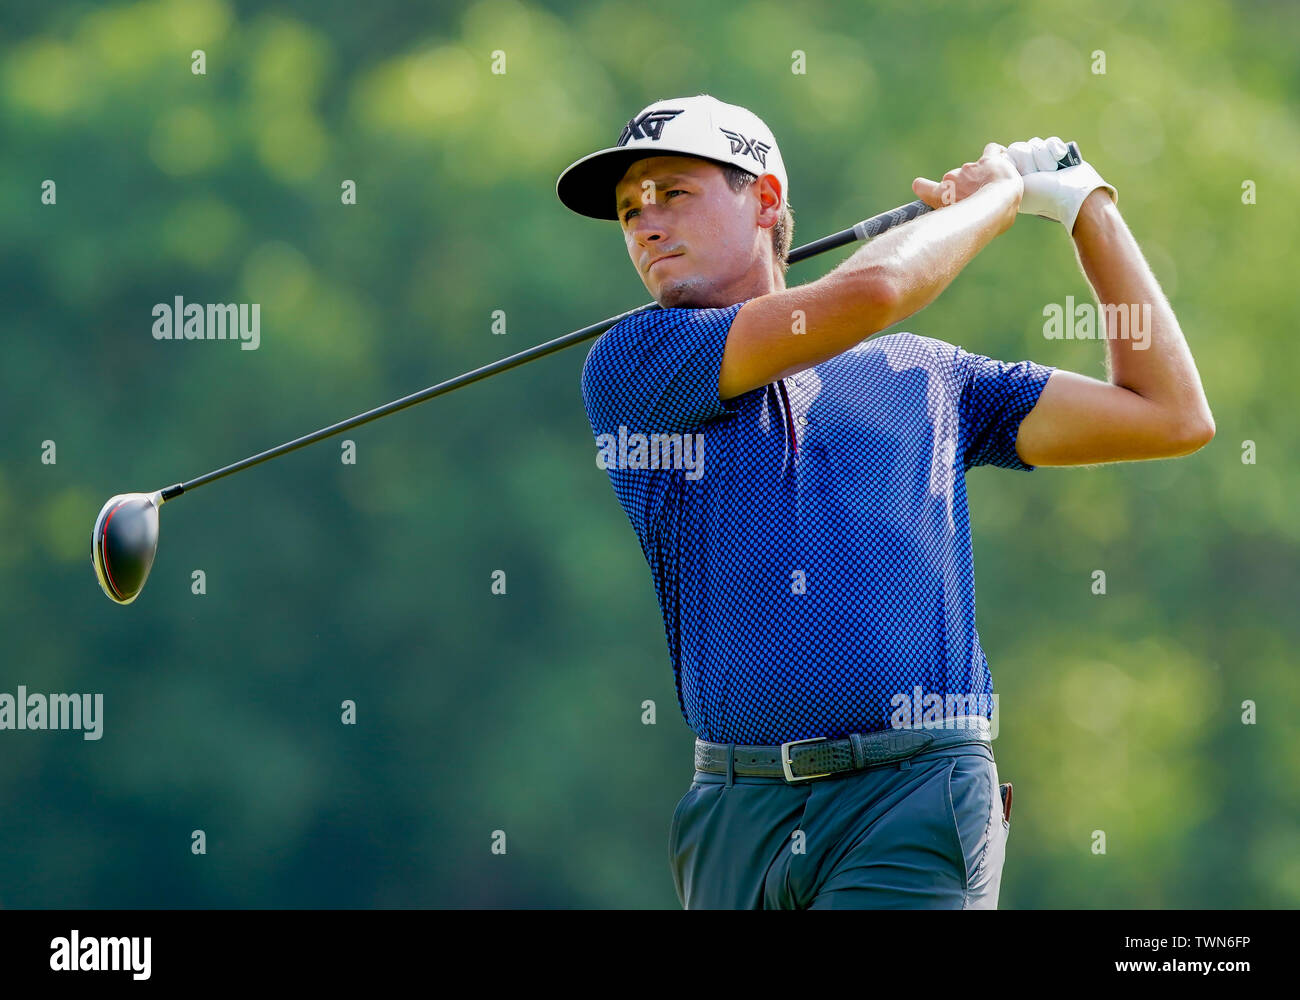 Wichita, KS, USA. 21st June, 2019. Ben Polland tees off during the second round of the Web.com Tour Wichita Open Supporting Wichita's Youth golf tournament at Crestview Country Club in Wichita, KS. Gray Siegel/CSM/Alamy Live News Stock Photo